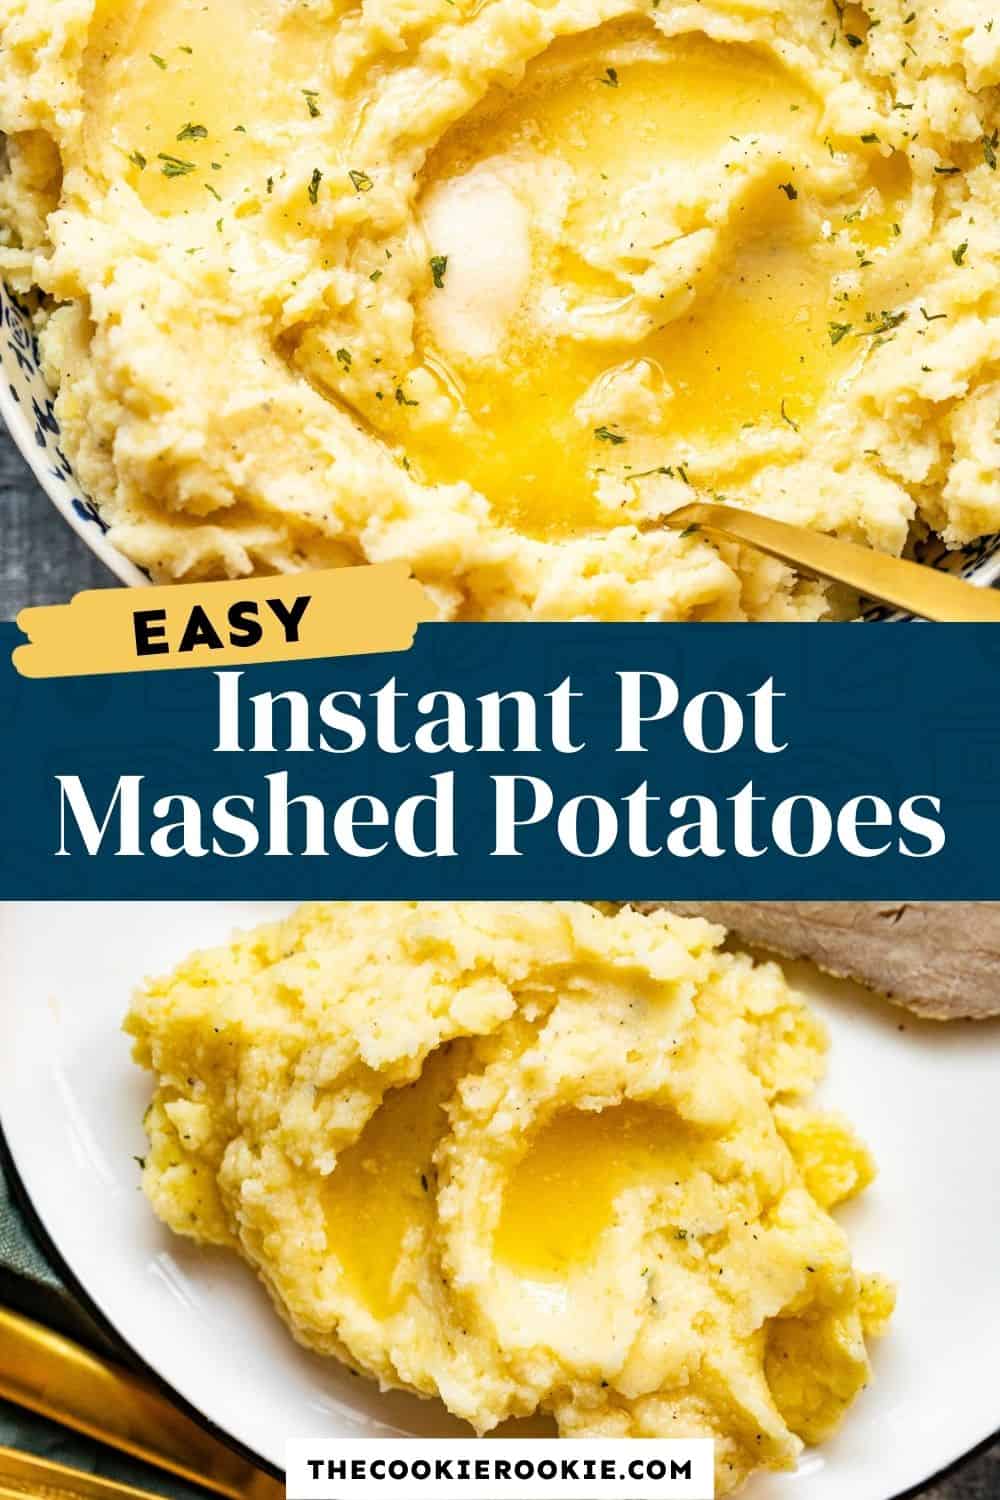 Instant Pot Mashed Potatoes Recipe - The Cookie Rookie®